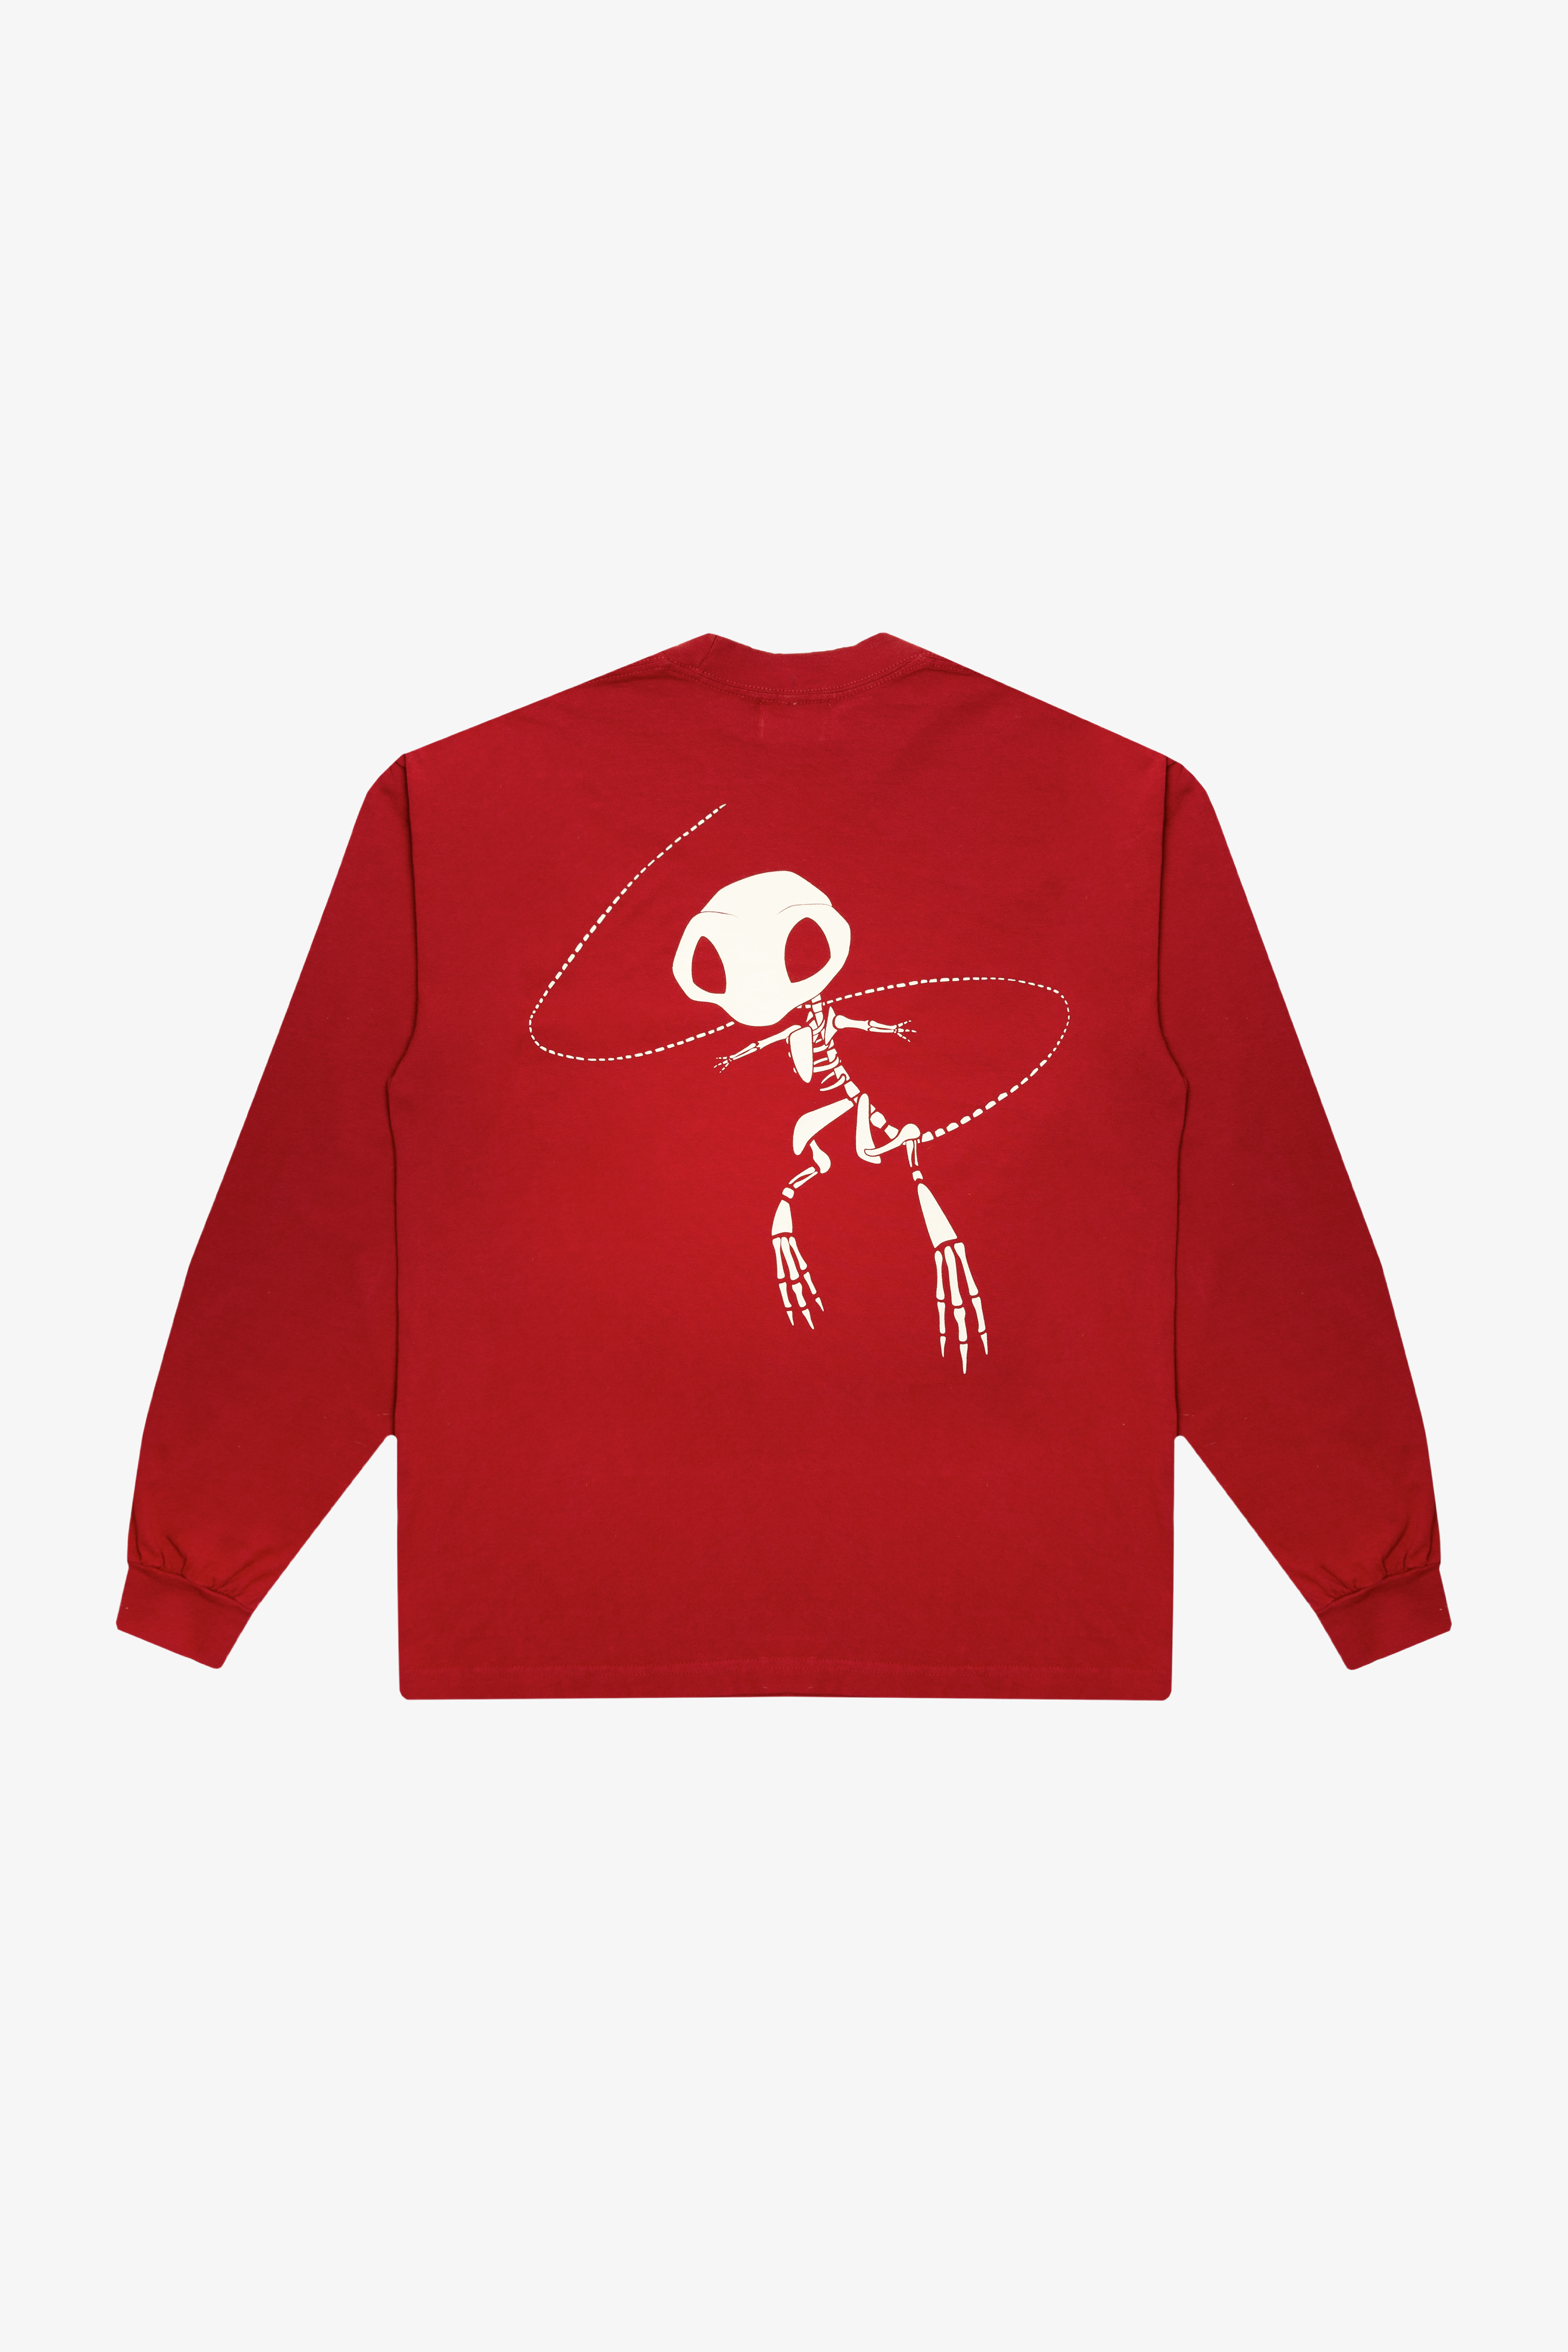 scarlet red long sleeve 'fossil' tee